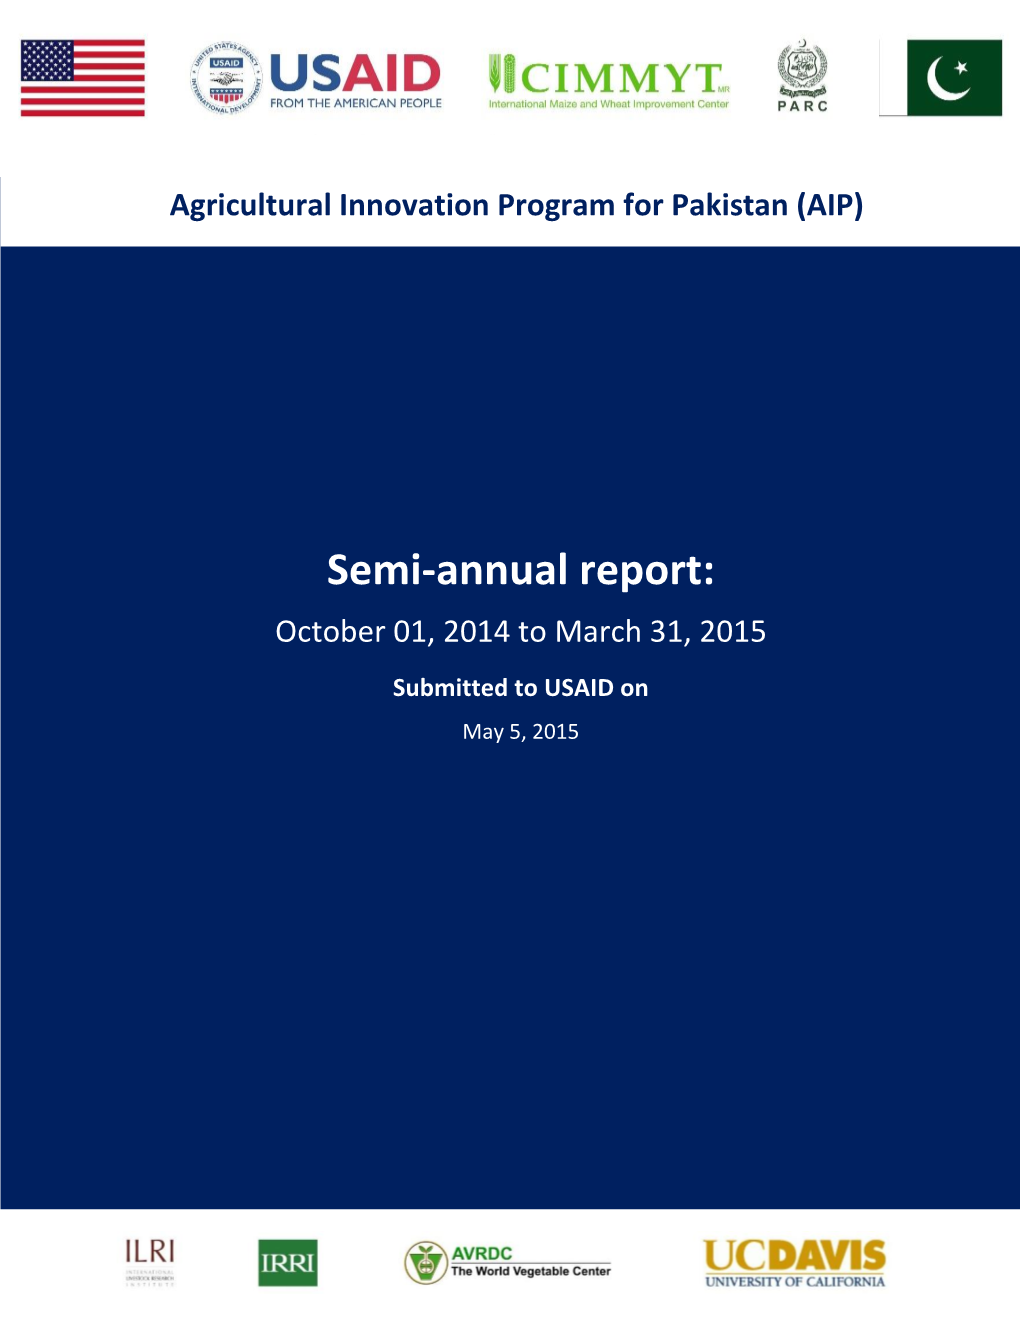 Semi-Annual Report: October 01, 2014 to March 31, 2015 Submitted to USAID on May 5, 2015